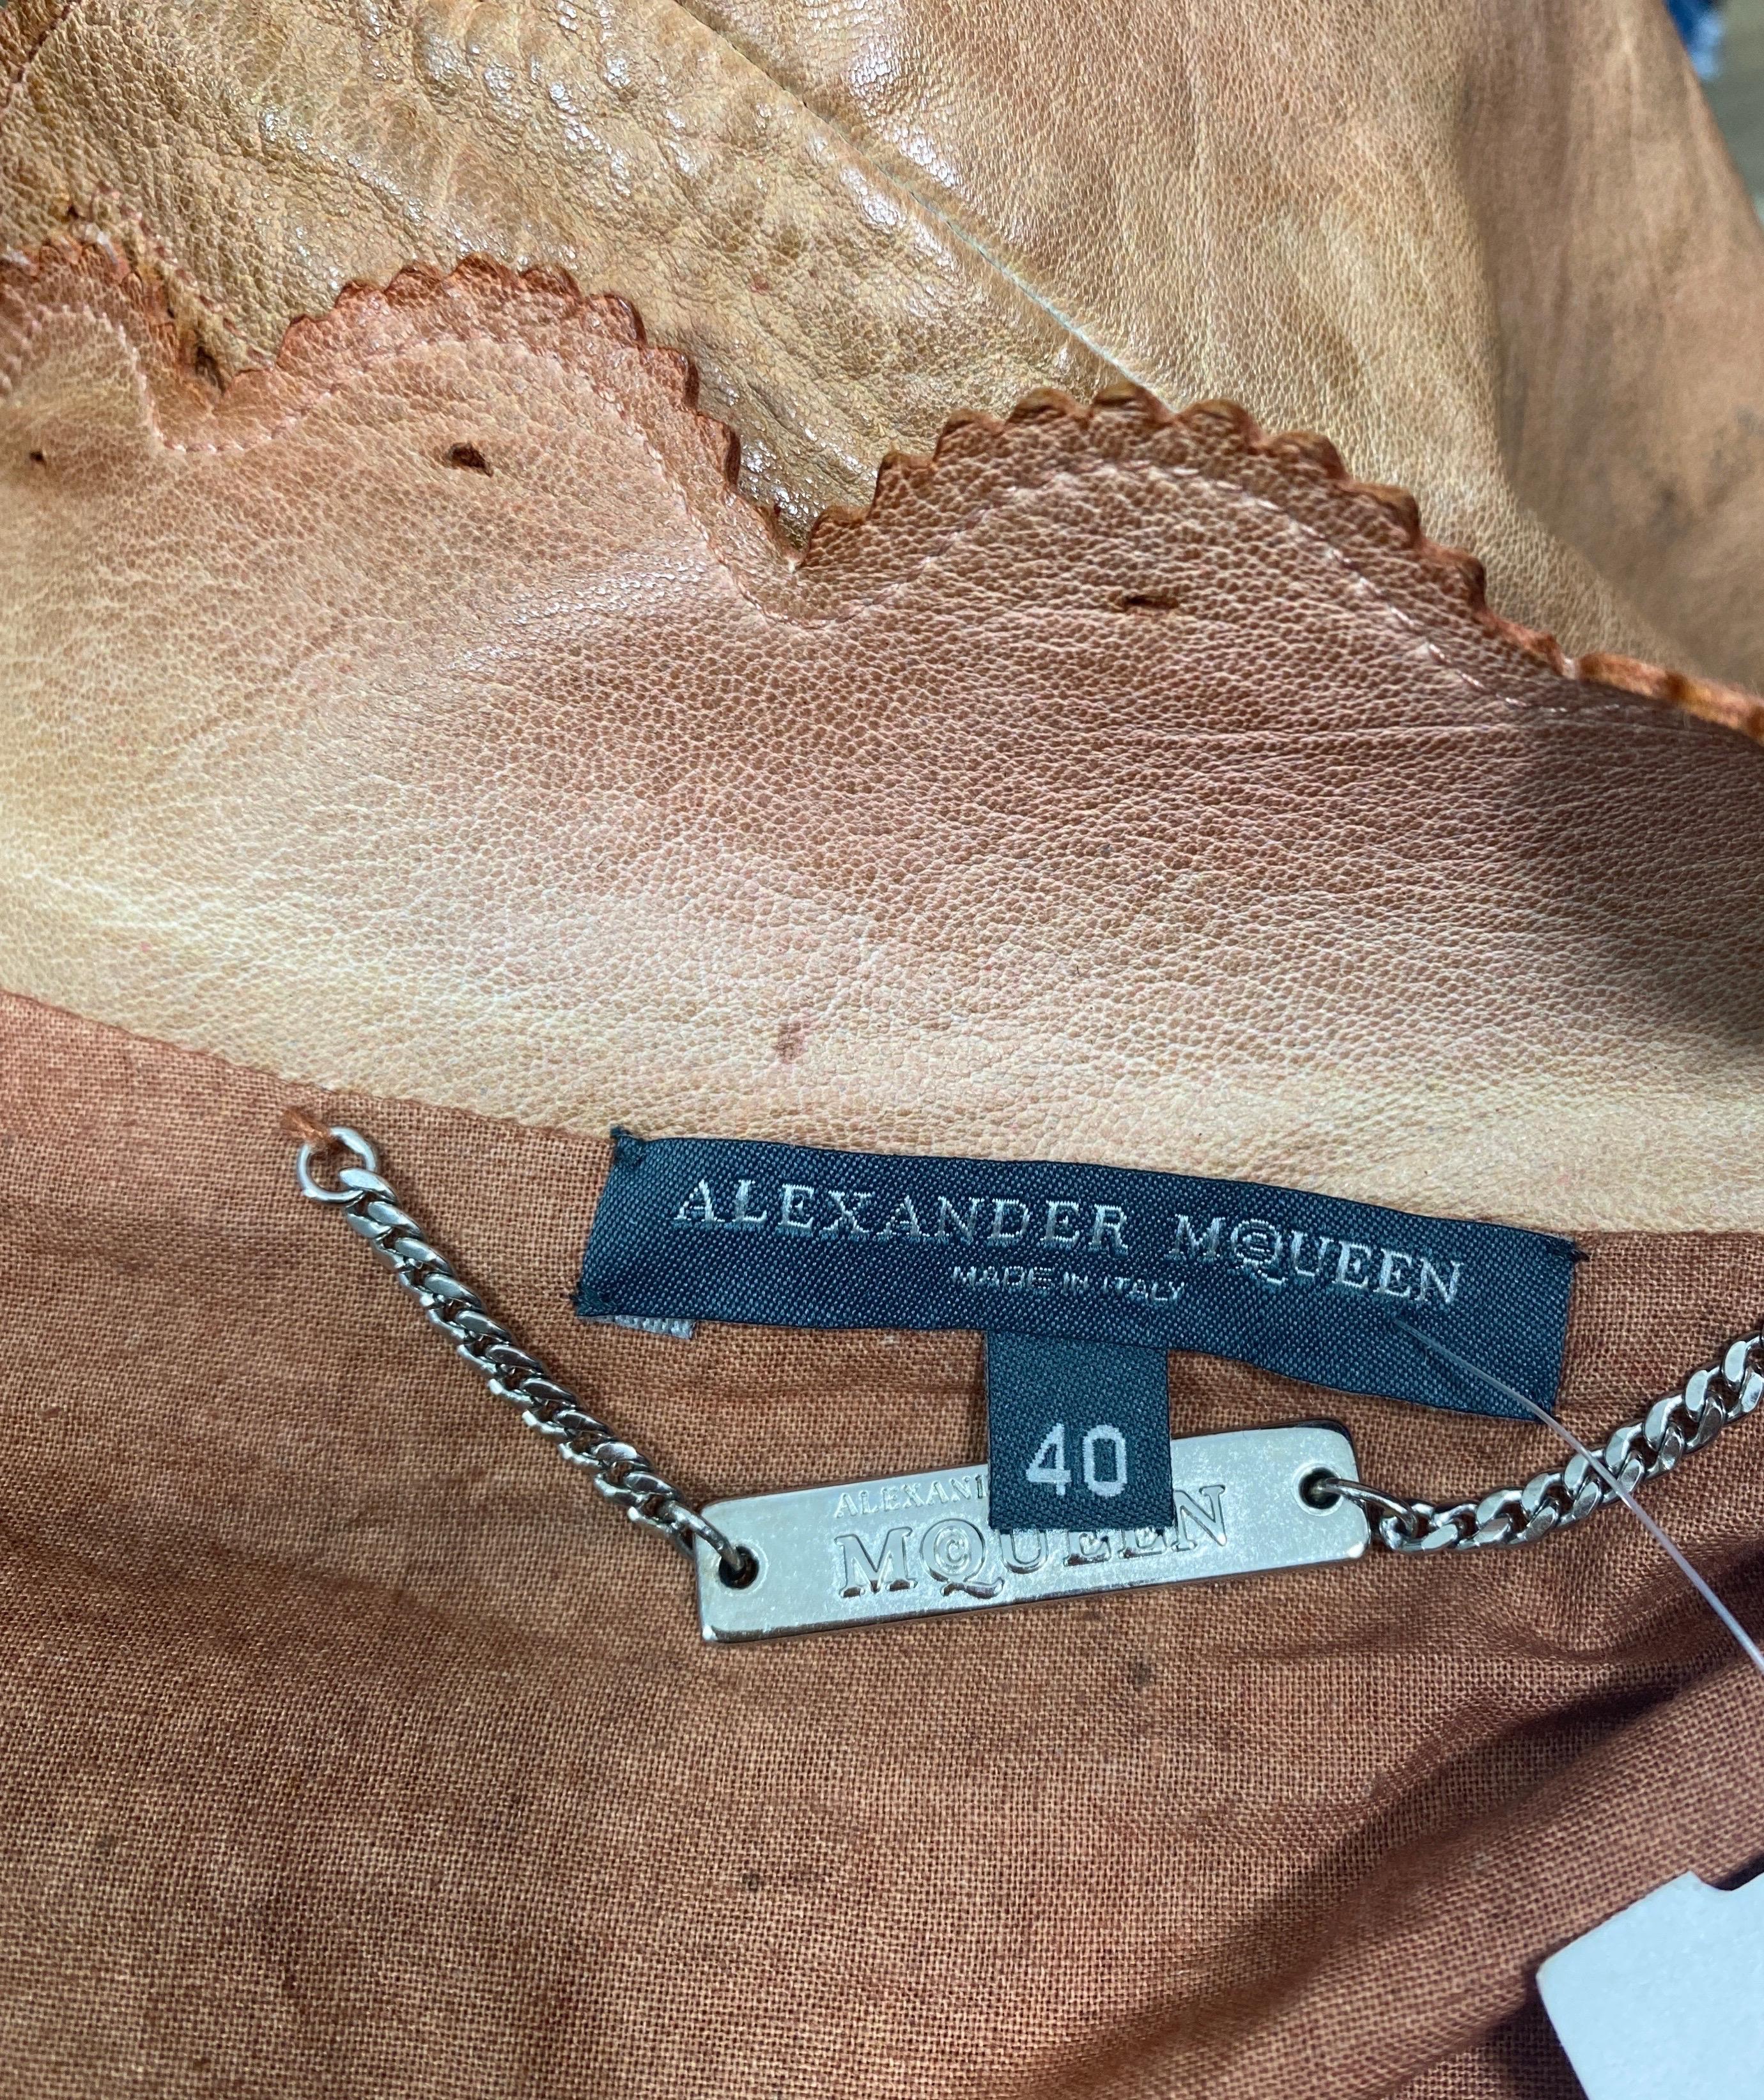 Alexander McQueen Dark Nude Distressed Leather Jacket-Size 40 For Sale 7